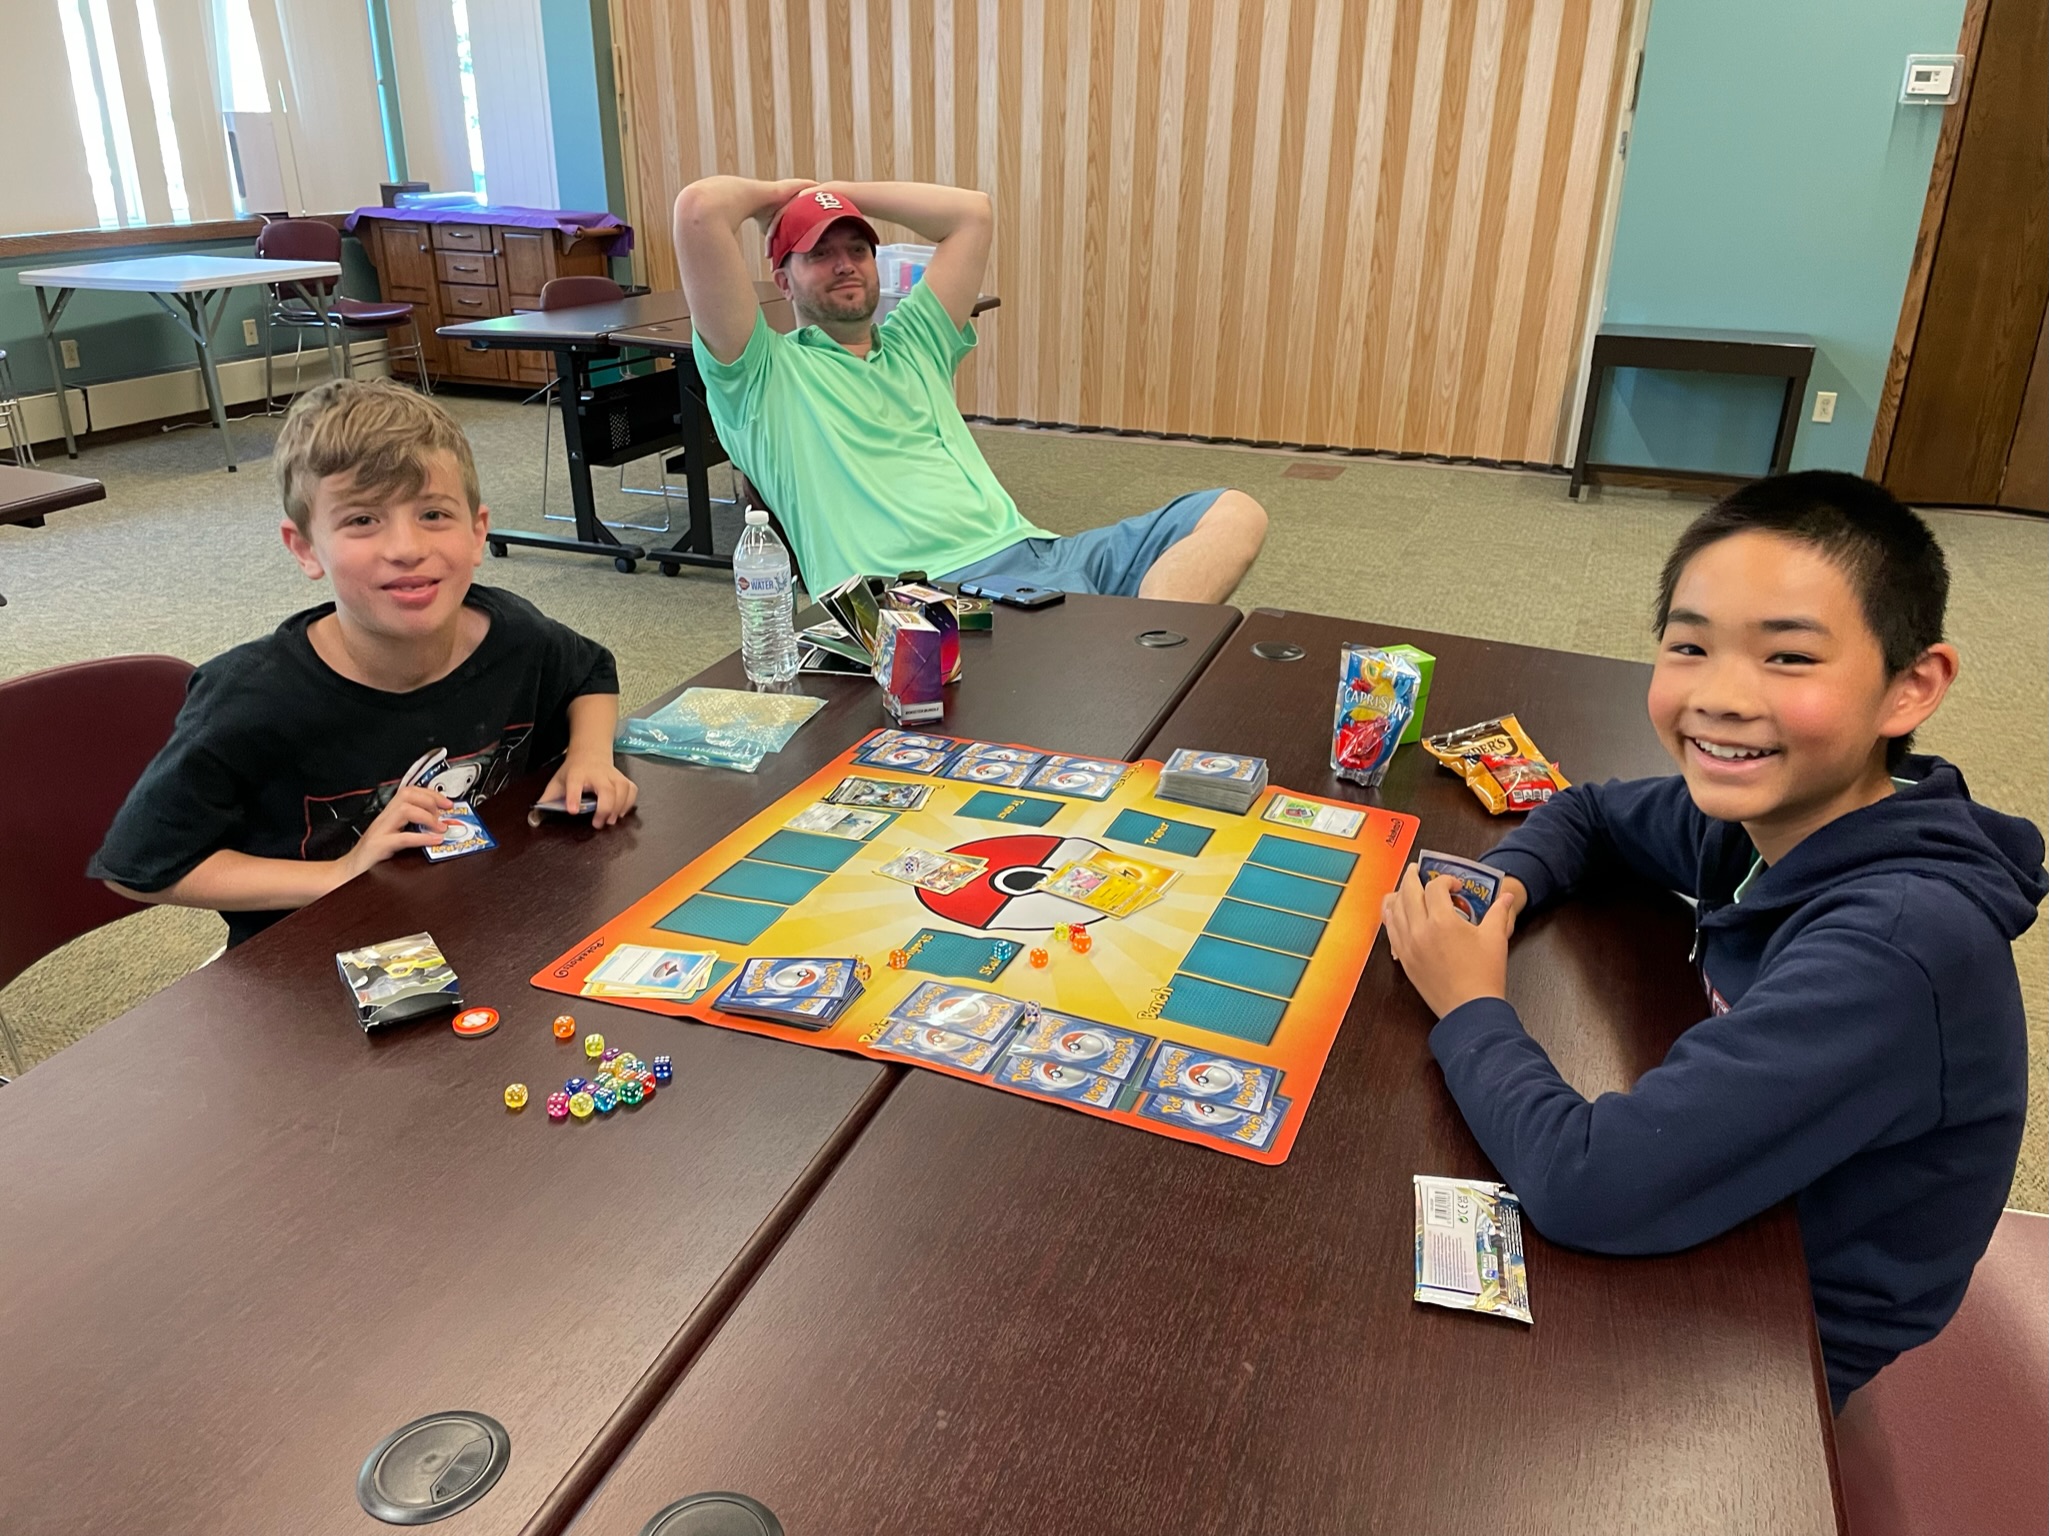 Two young boys smile at the camera in the middle of a Pokémon Trading Card Game at the Derby Neck Library.